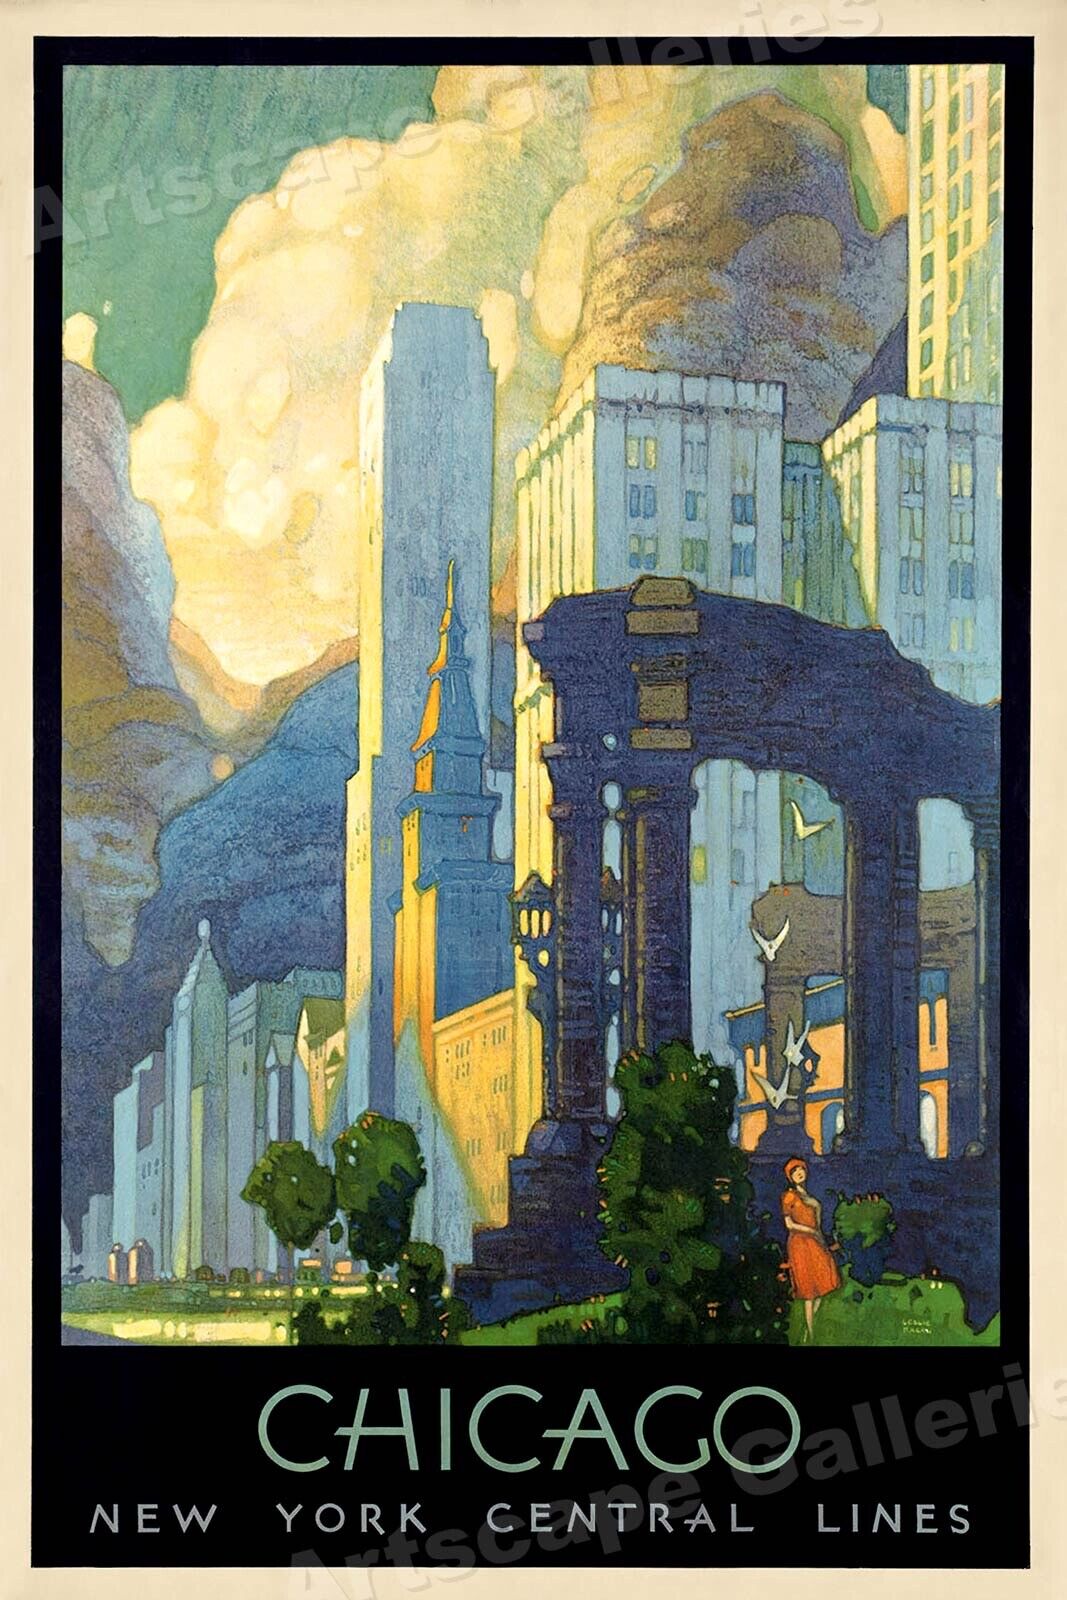 1920s Chicago NY Central Lines Art Deco Vintage Style Travel Poster - 16x24